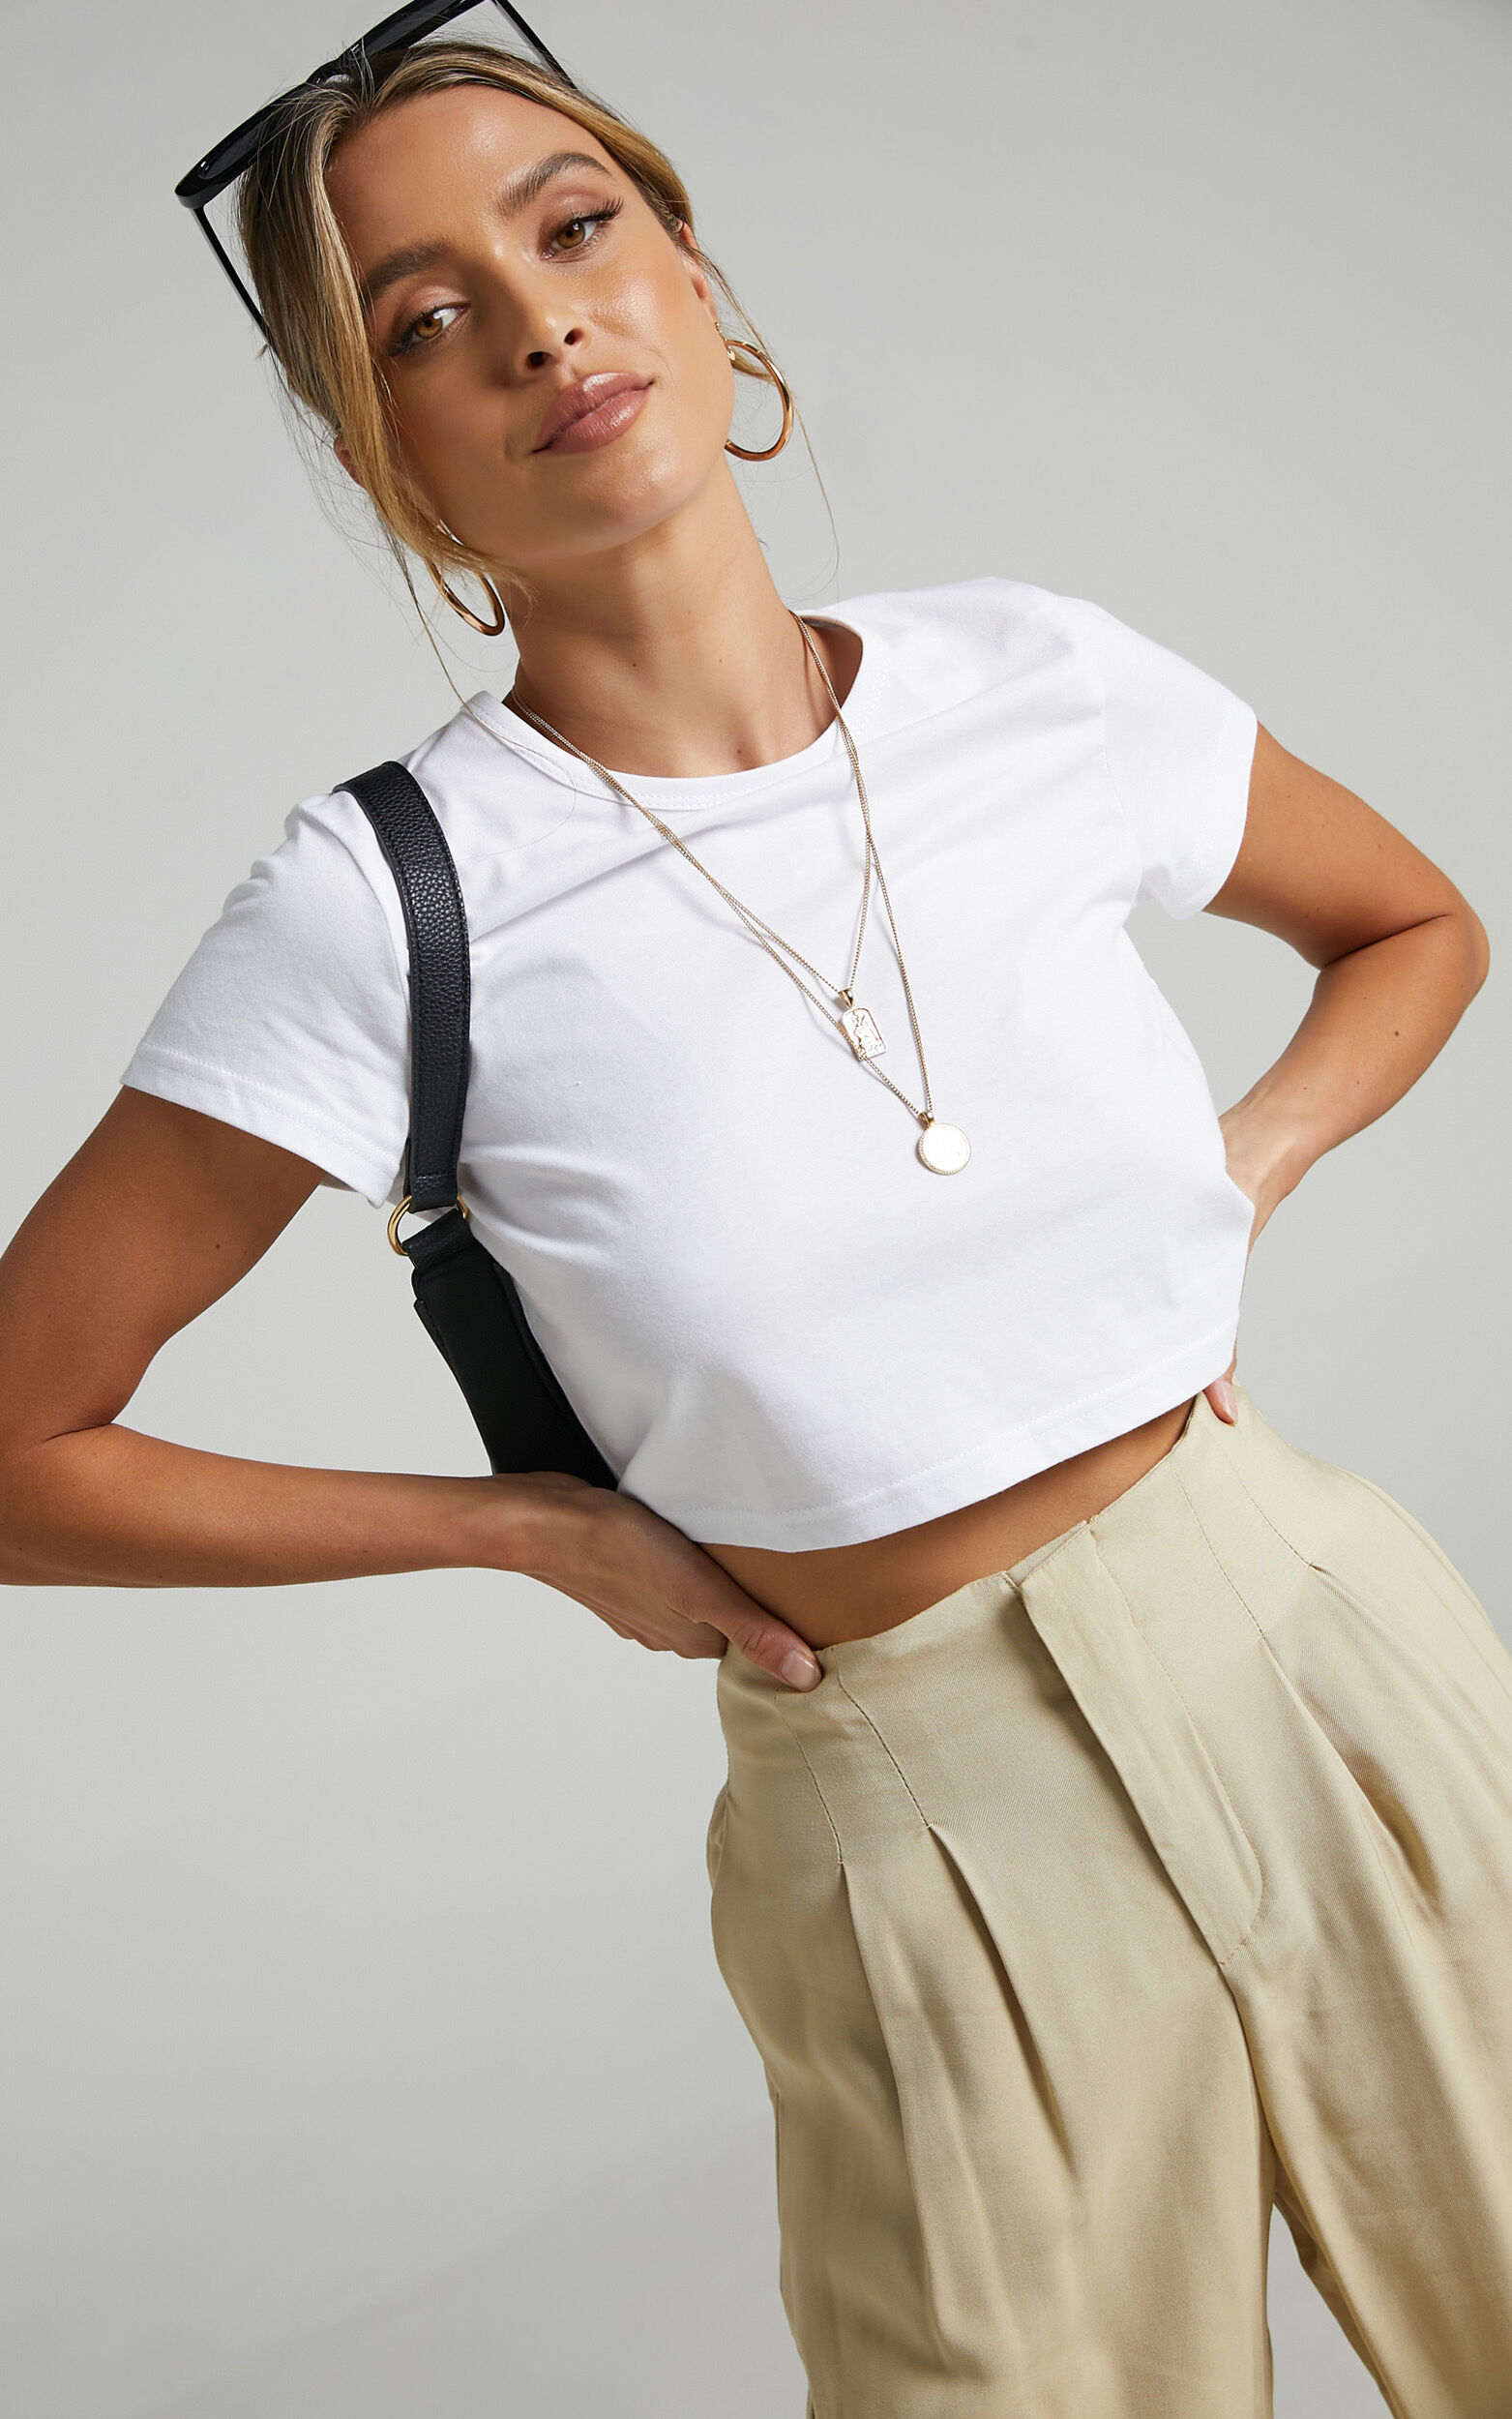 Danzel Top - Boxy Fit Cap Sleeve Crop Top in White - 06, WHT3